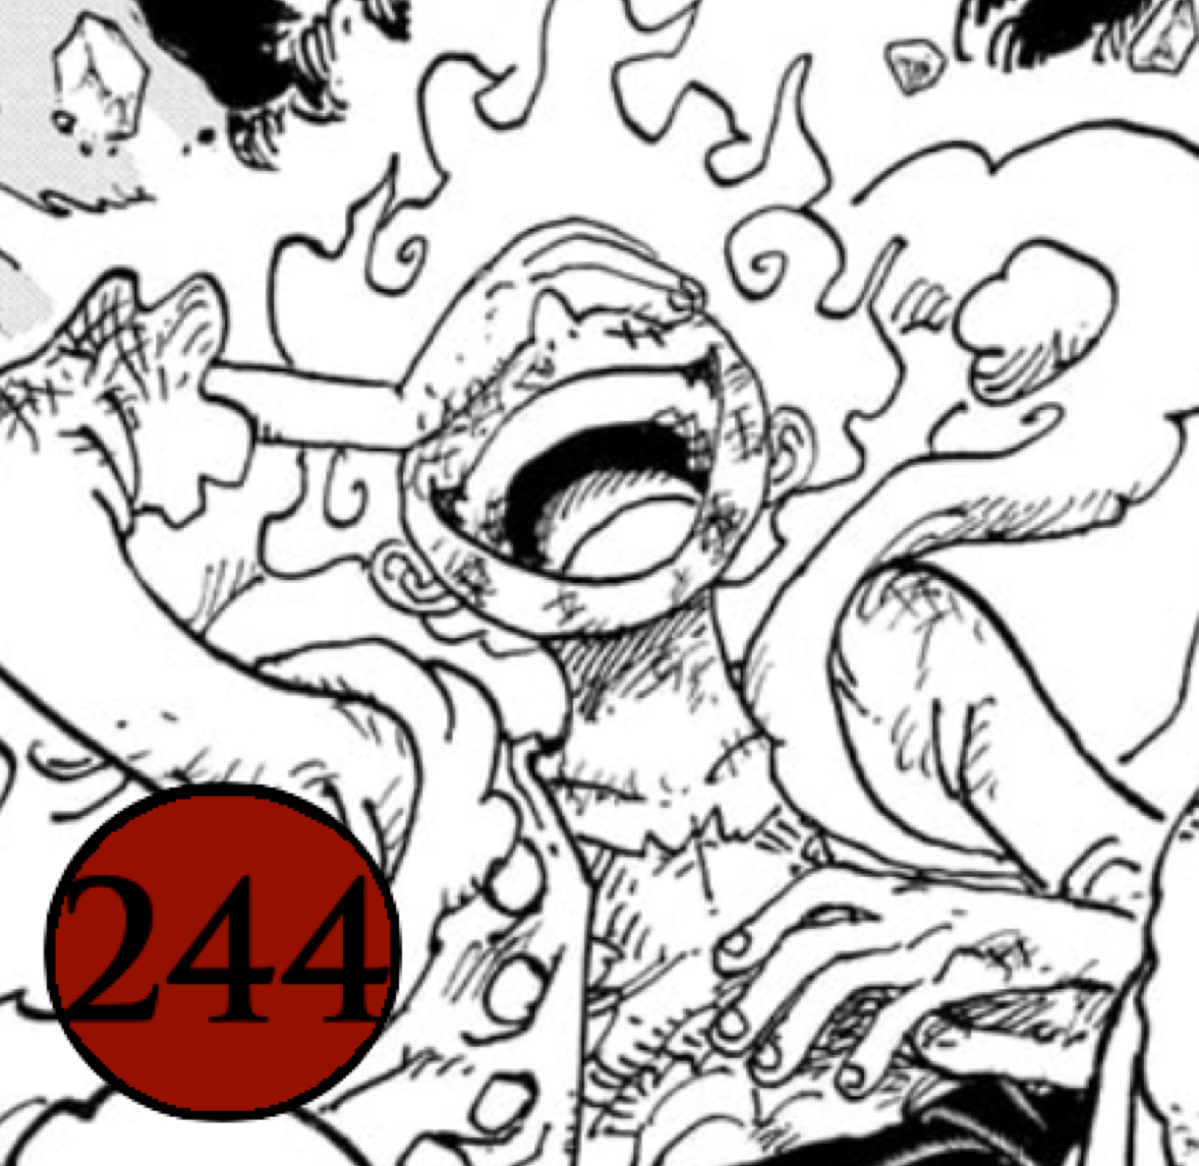 One Piece chapter 1044 has fans revisiting past art piece